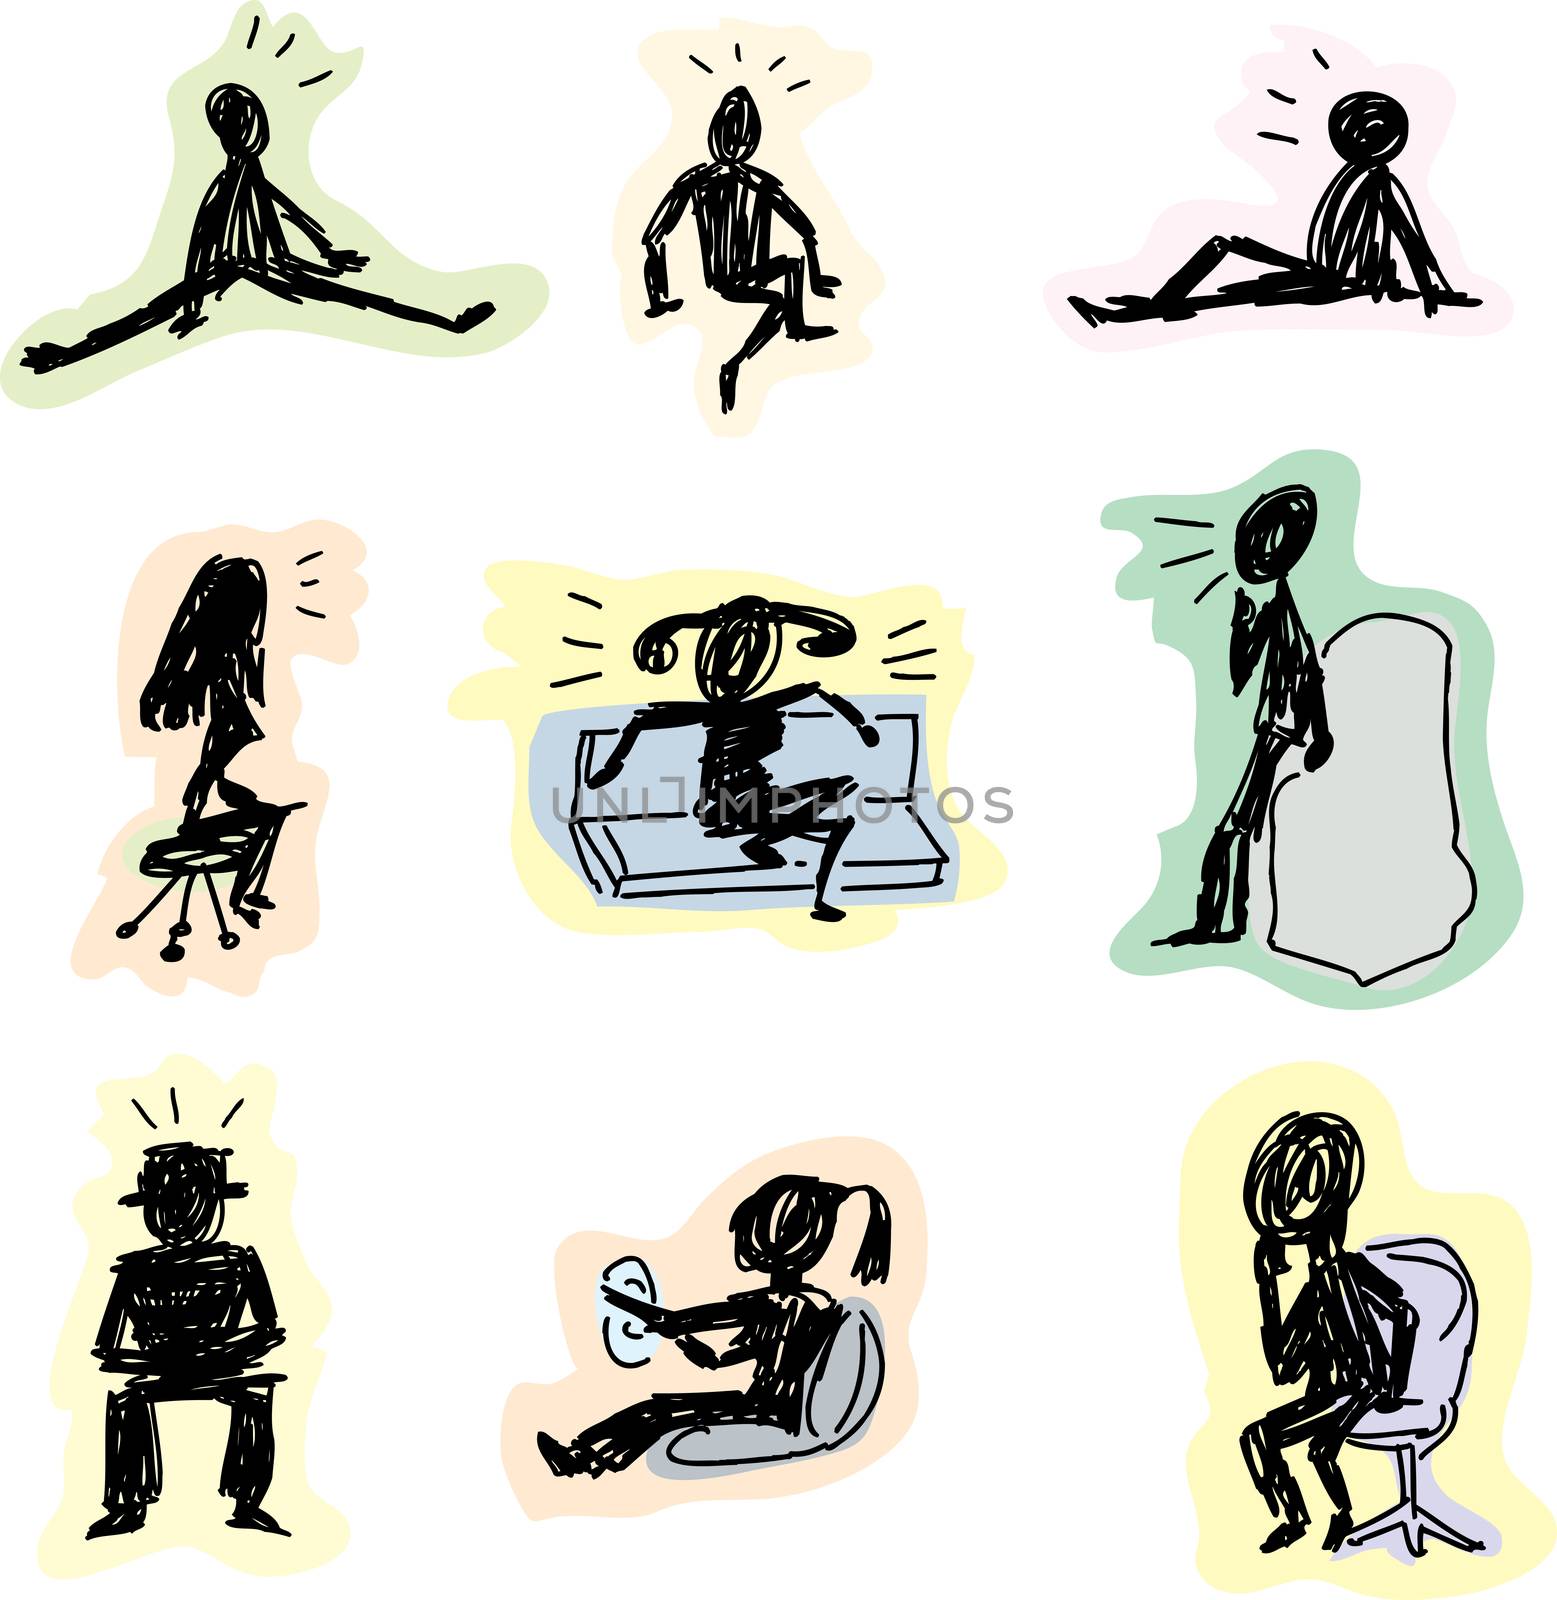 Sketches of stick figures sitting in different positions